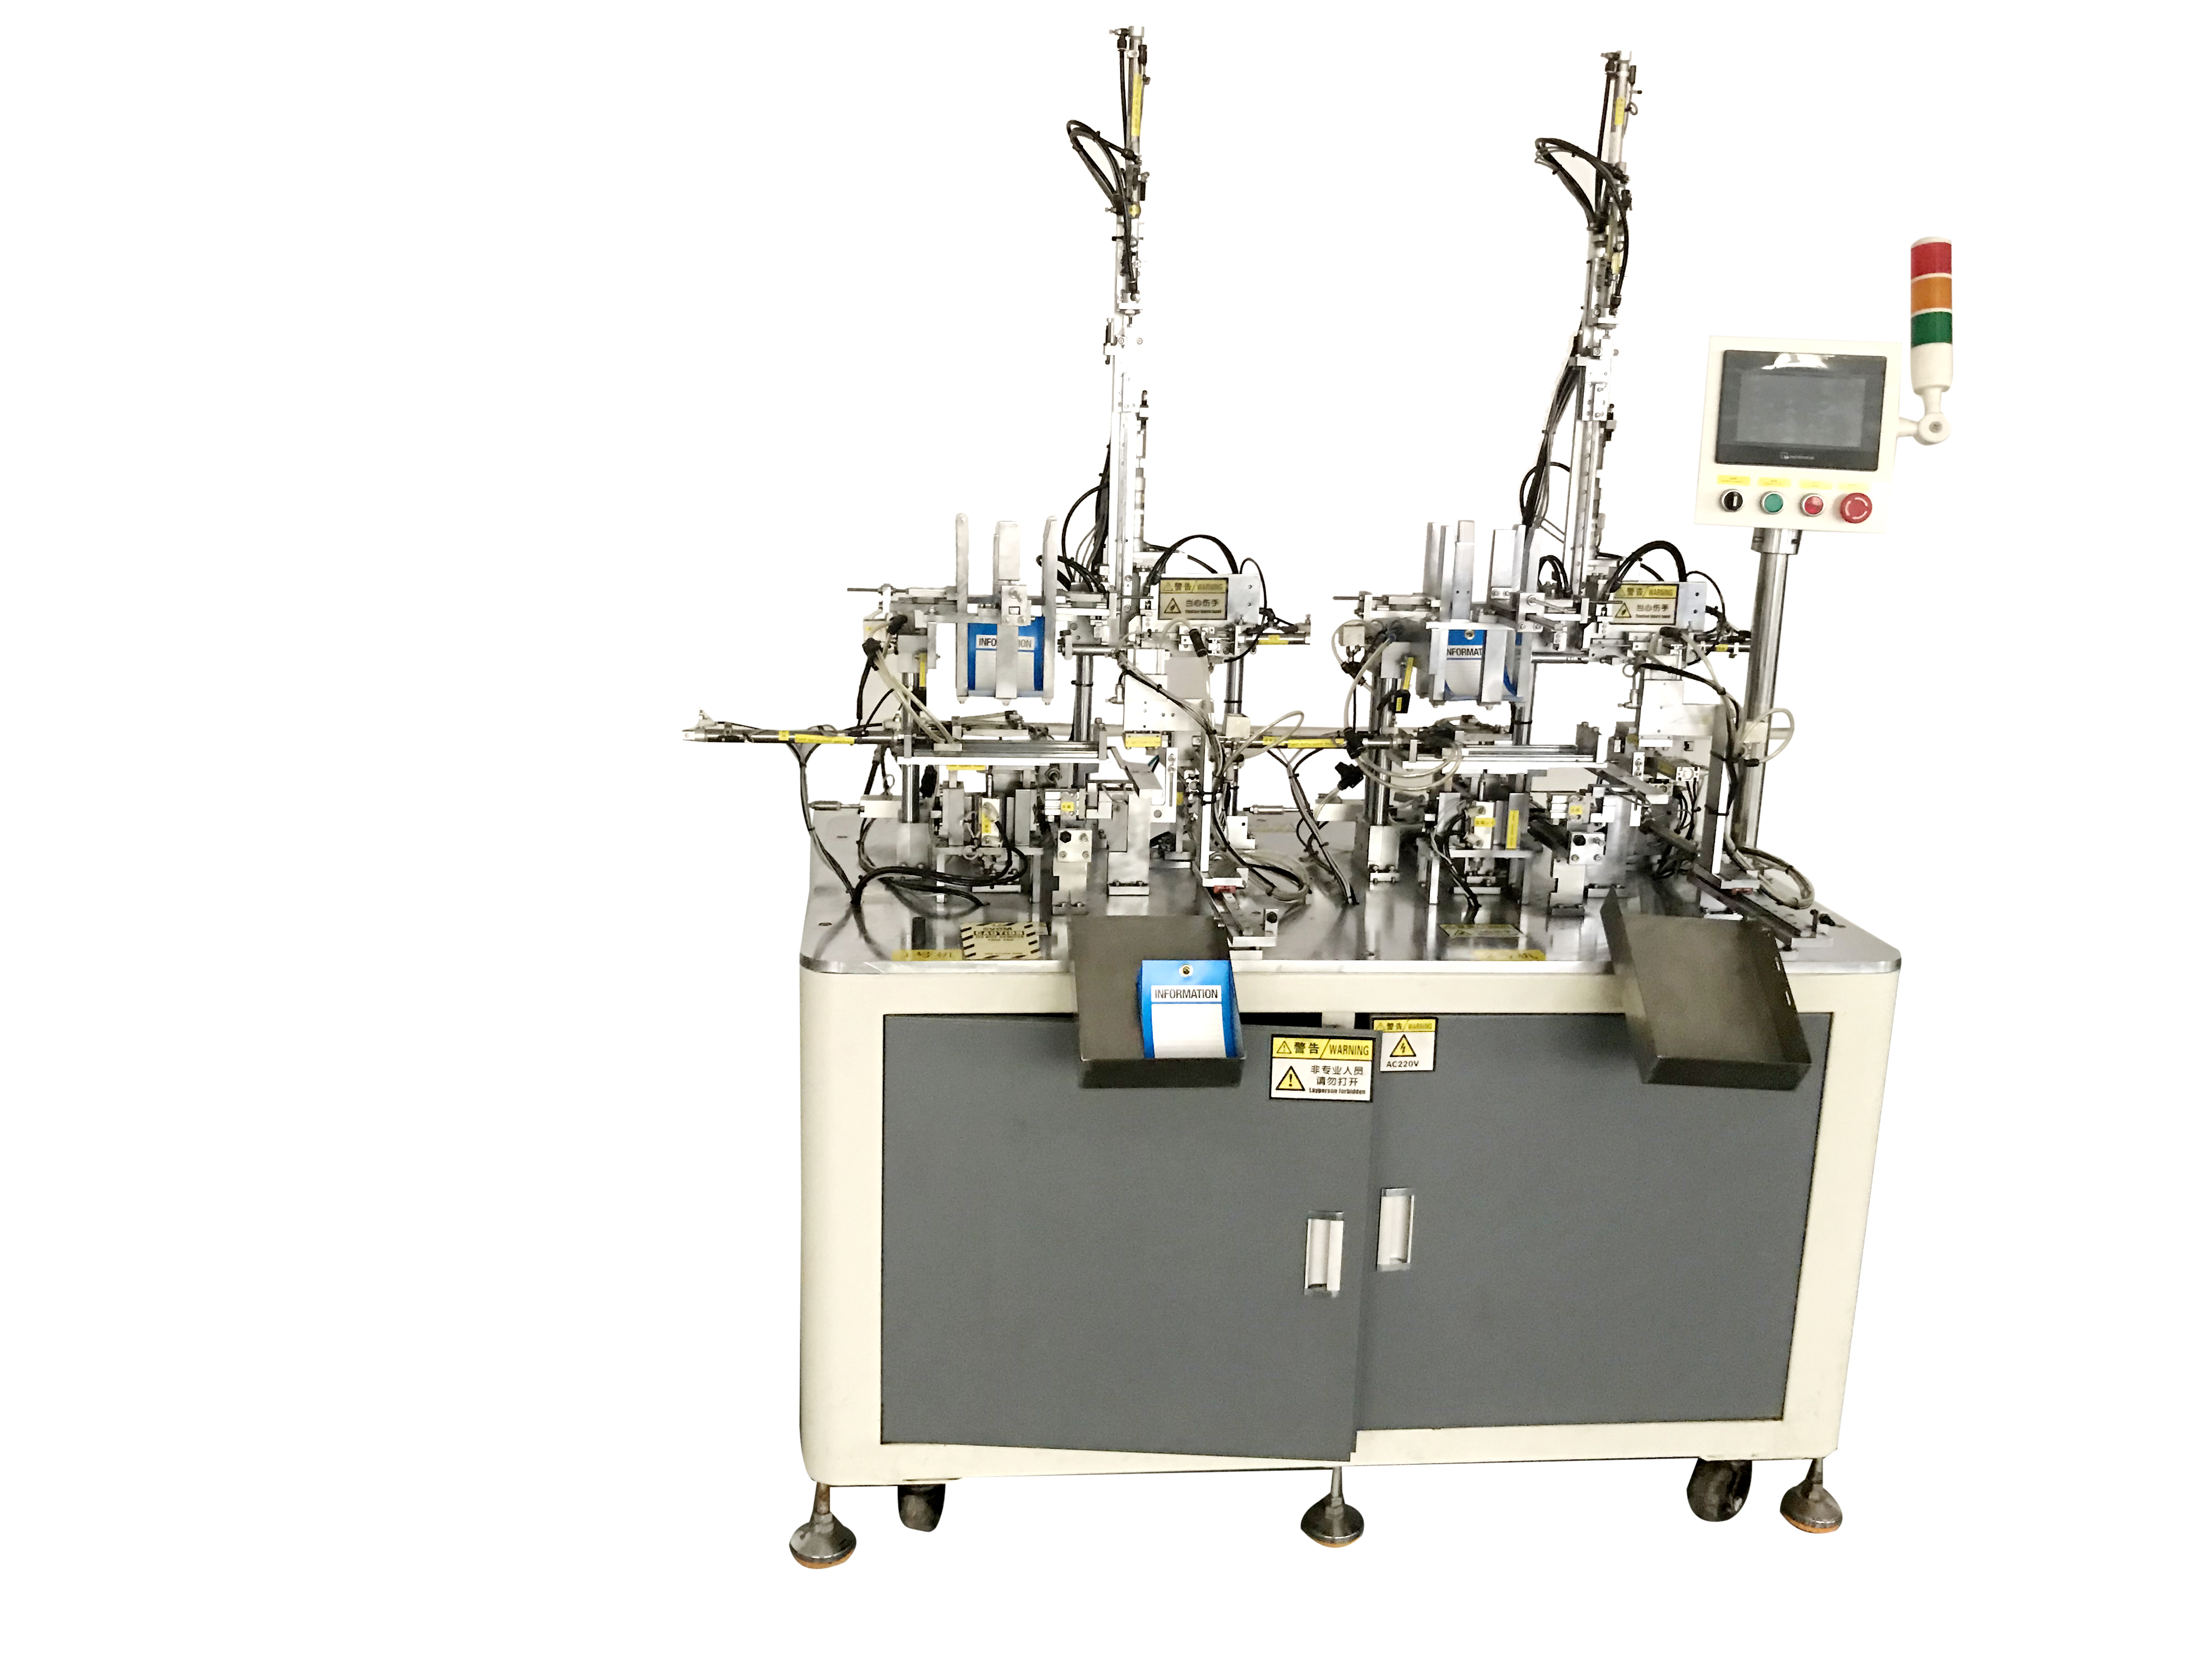 Full automatic hang tag looped string threading machine (LM-LY8)